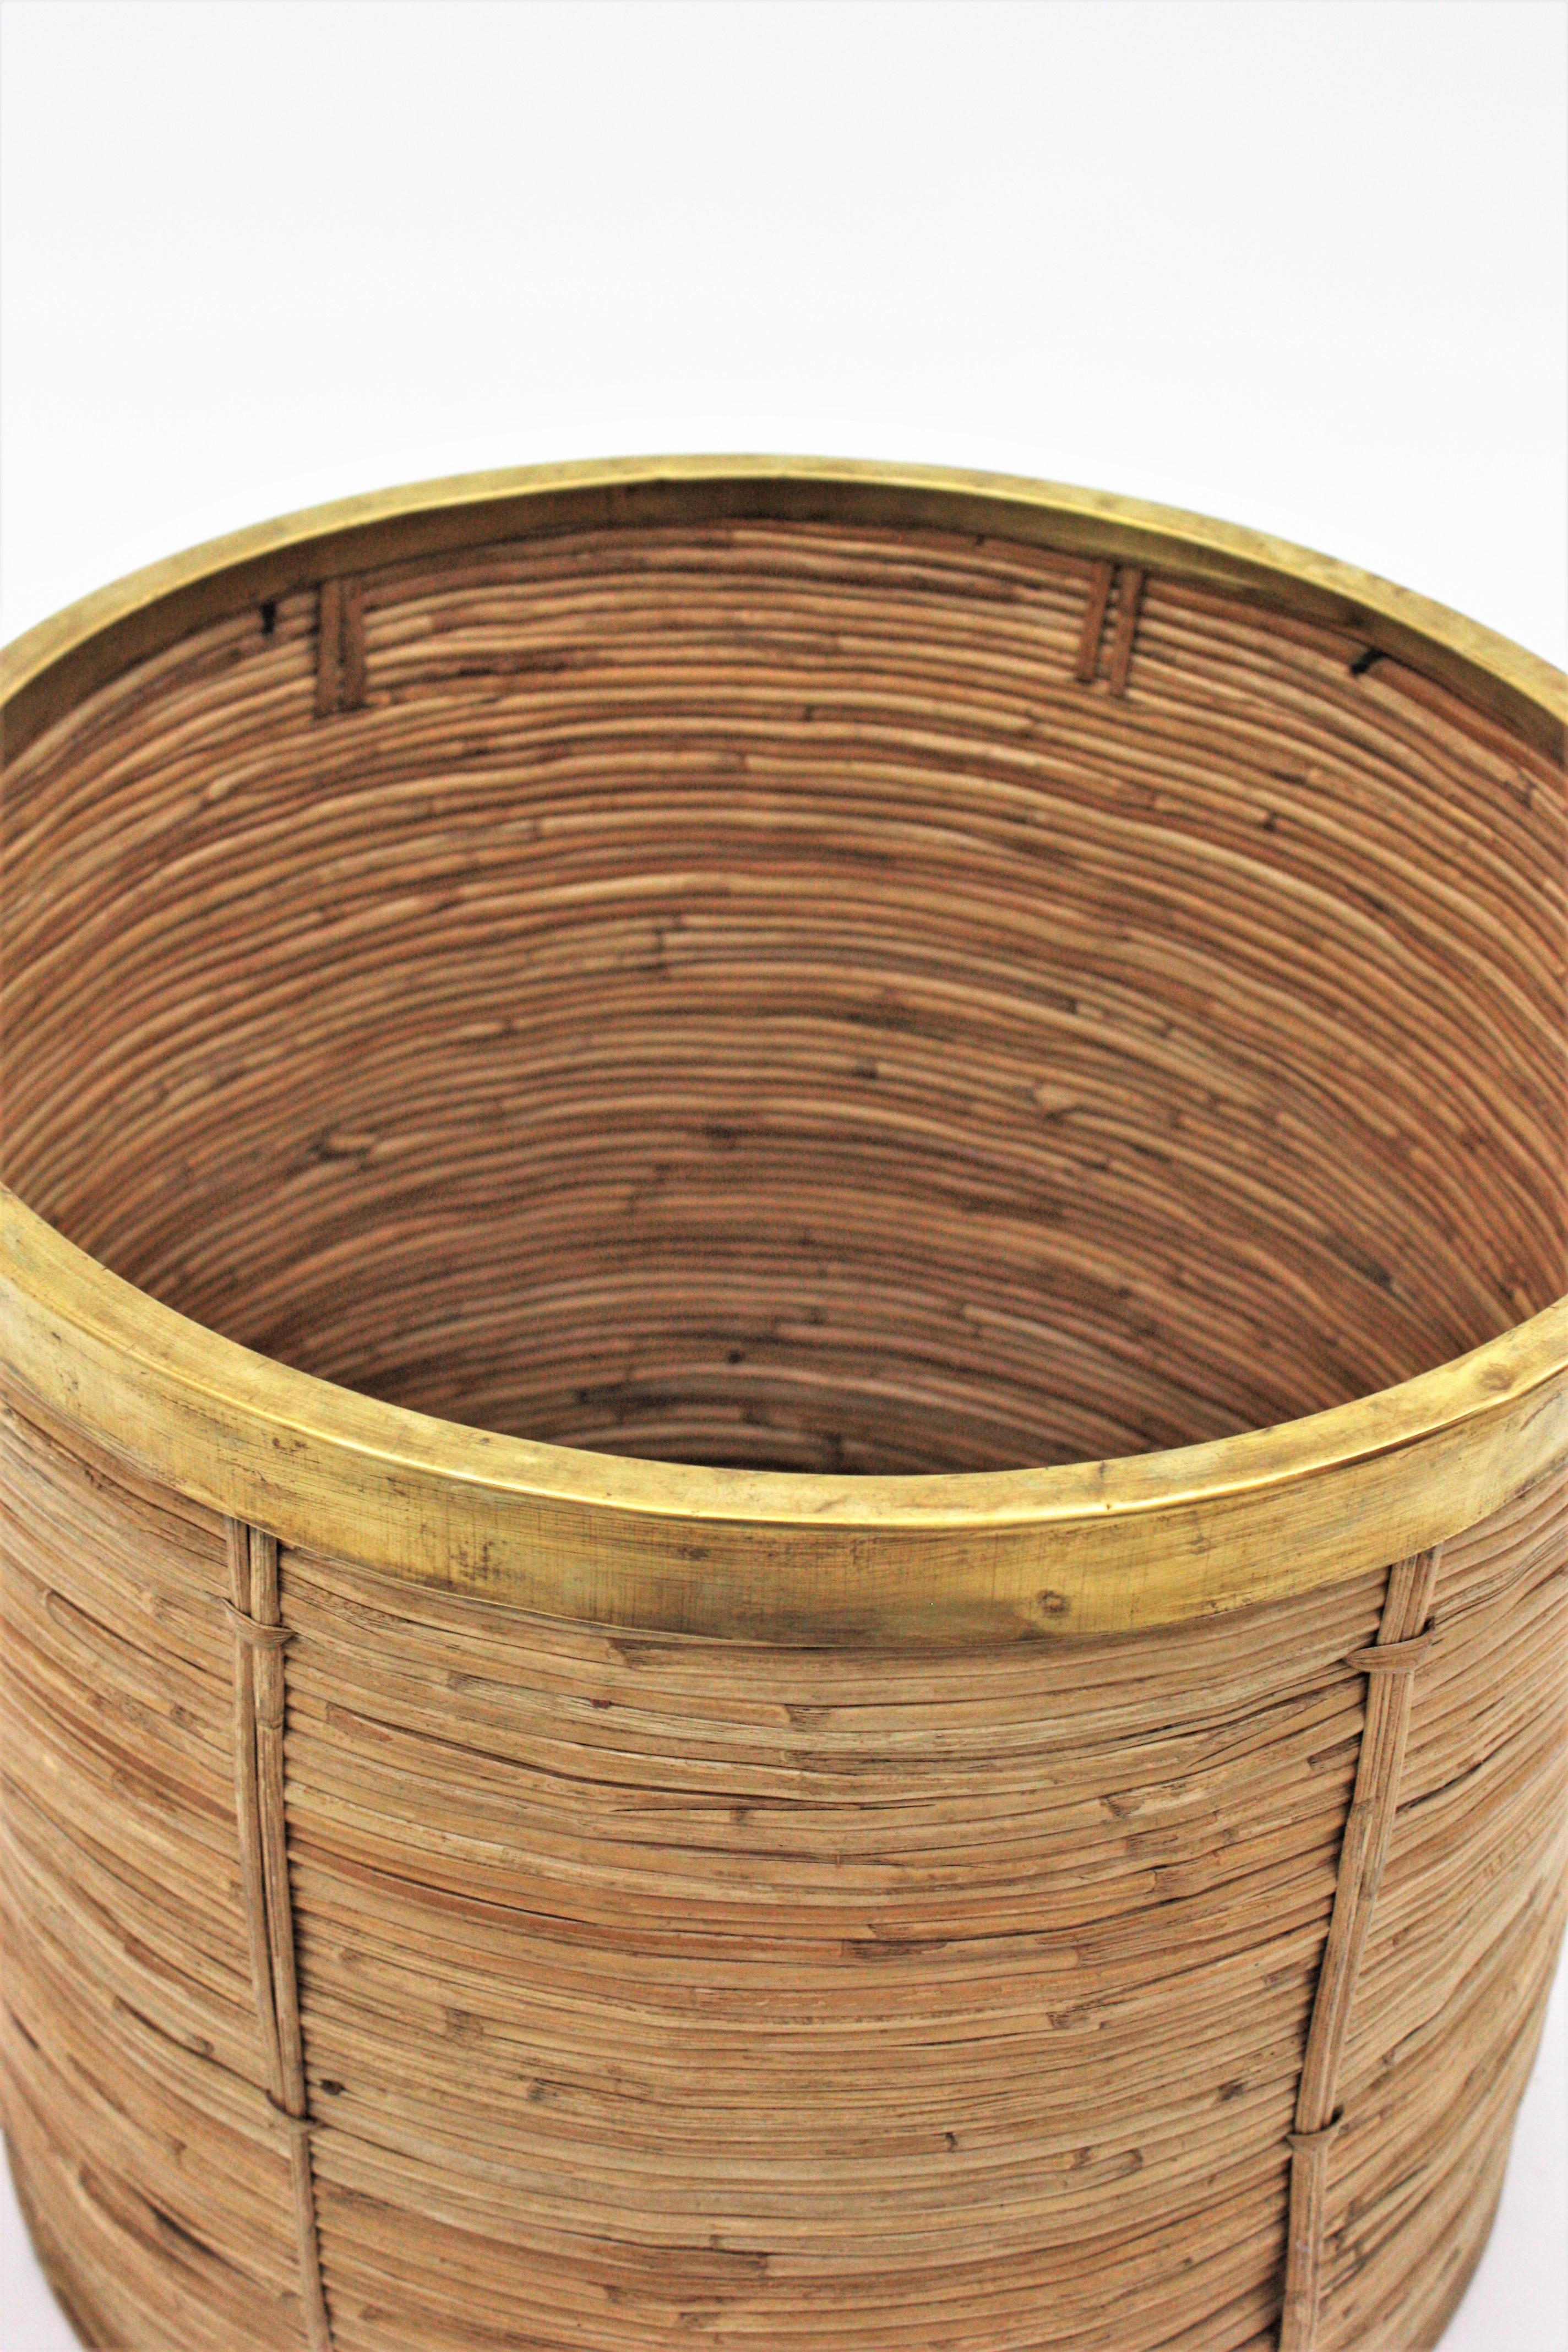 Large Rattan Bamboo Round Planter with Brass Rim, Italy, 1970s For Sale 3